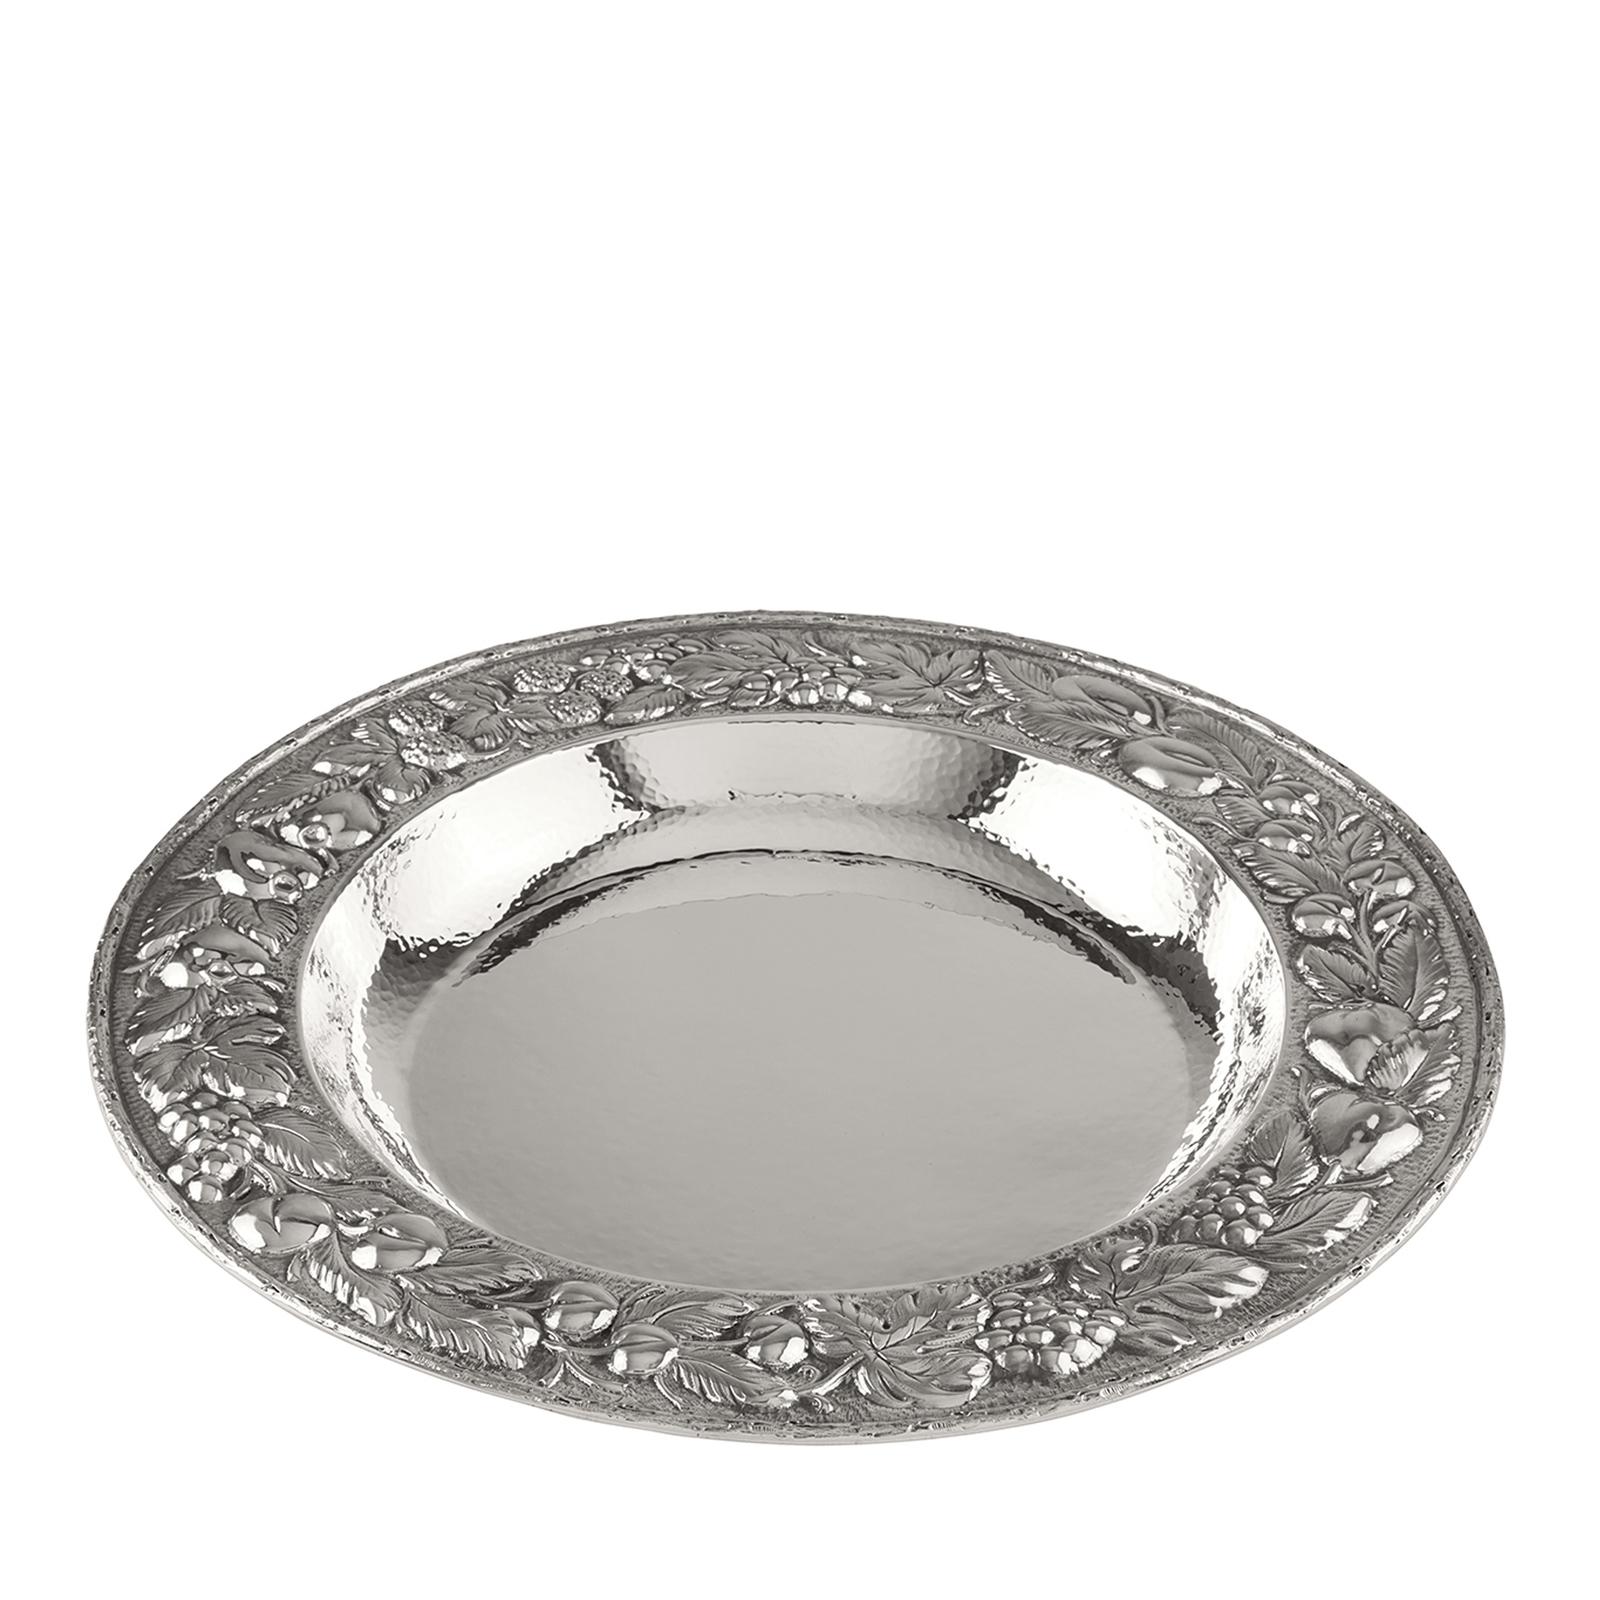 This elegant centrepiece is a deep dish entirely made in silver whose internal surface is textured with the Classic hammered surface, while the lip is intricately adorned with a magnificent chiselled decoration that depicts a garland of leaves,